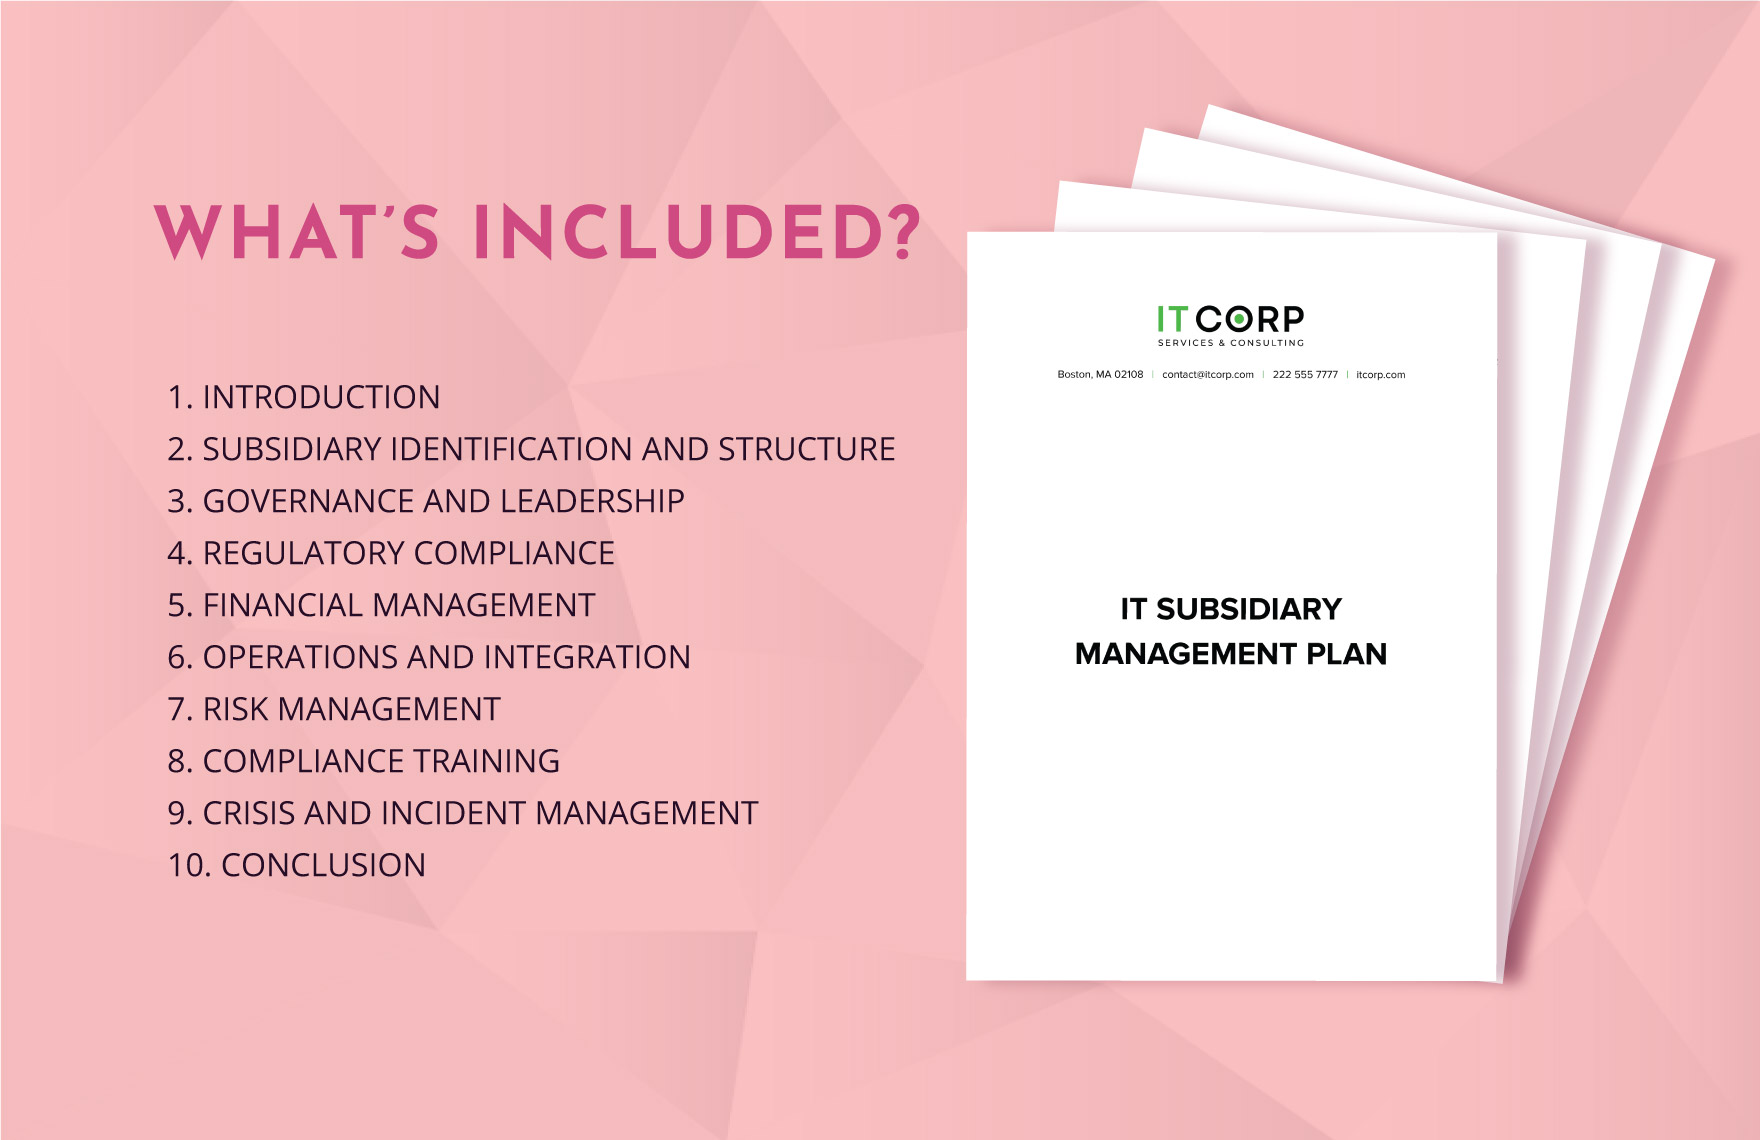 IT Subsidiary Management Plan Template